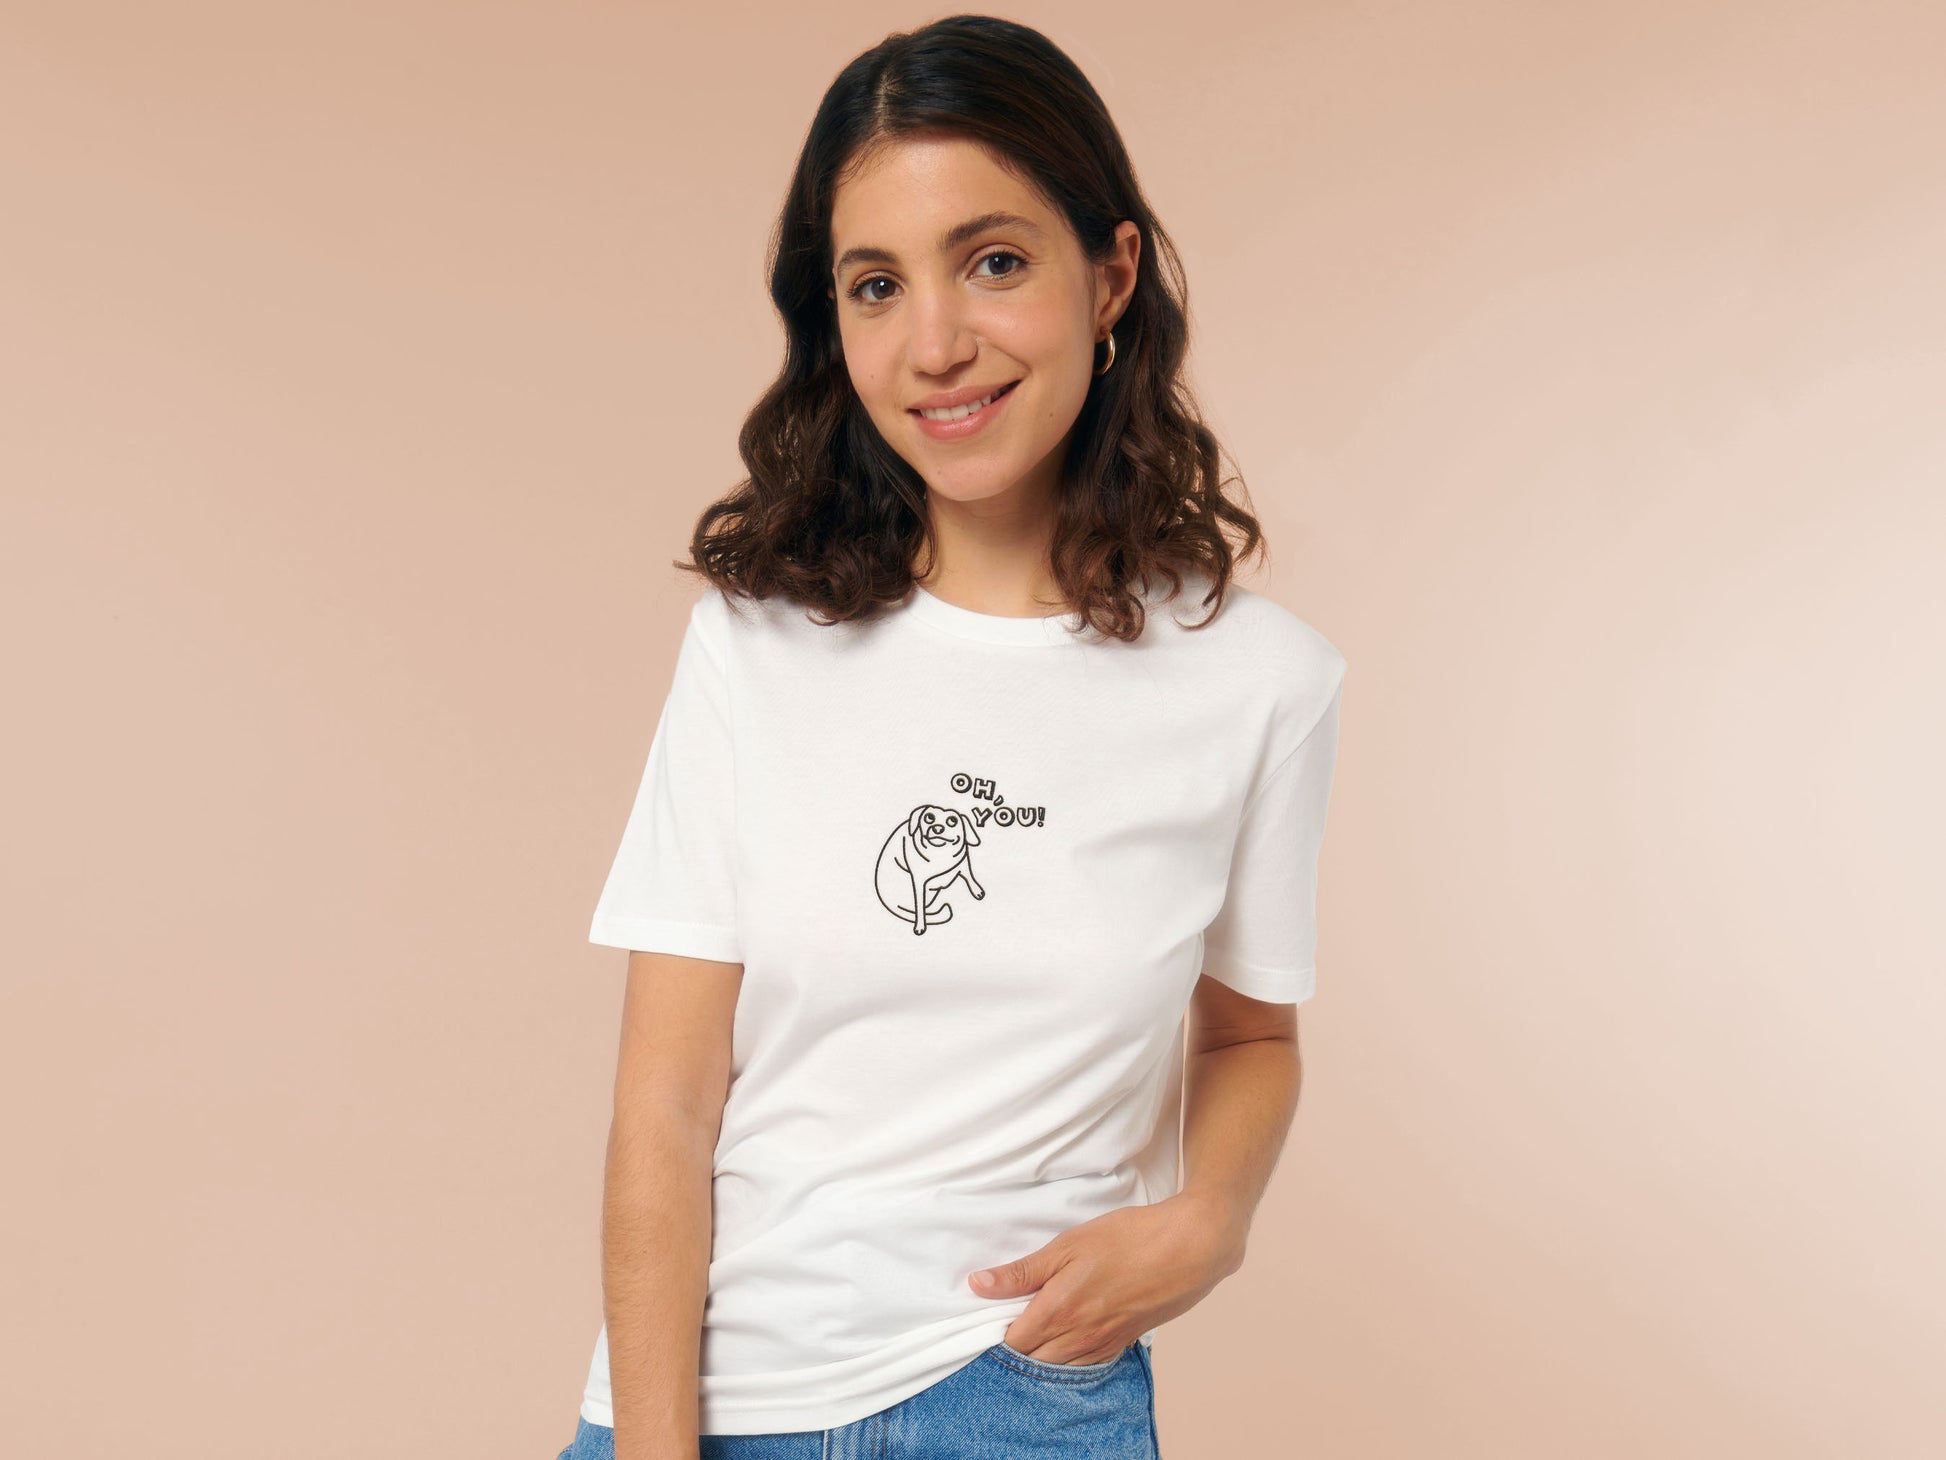 Woman wearing an off white crew neck short sleeve t-shirt, with an embroidered black thread design of cute meme dog with cheeky expression and big eyes, with the text Oh You!